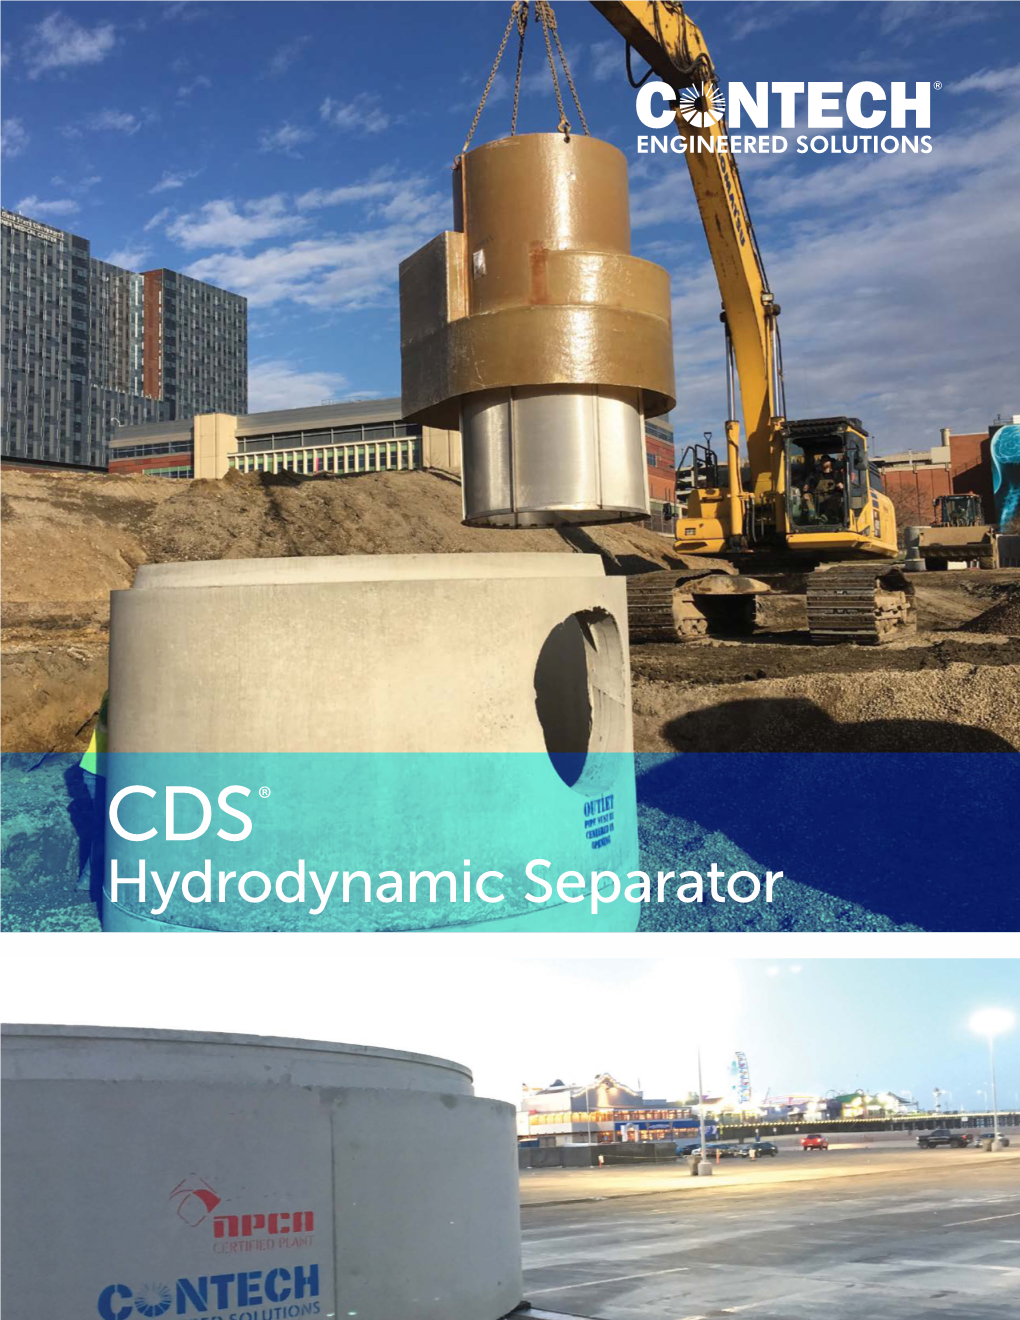 Hydrodynamic Separator the Experts You Need to Solve Your Stormwater Management Challenges